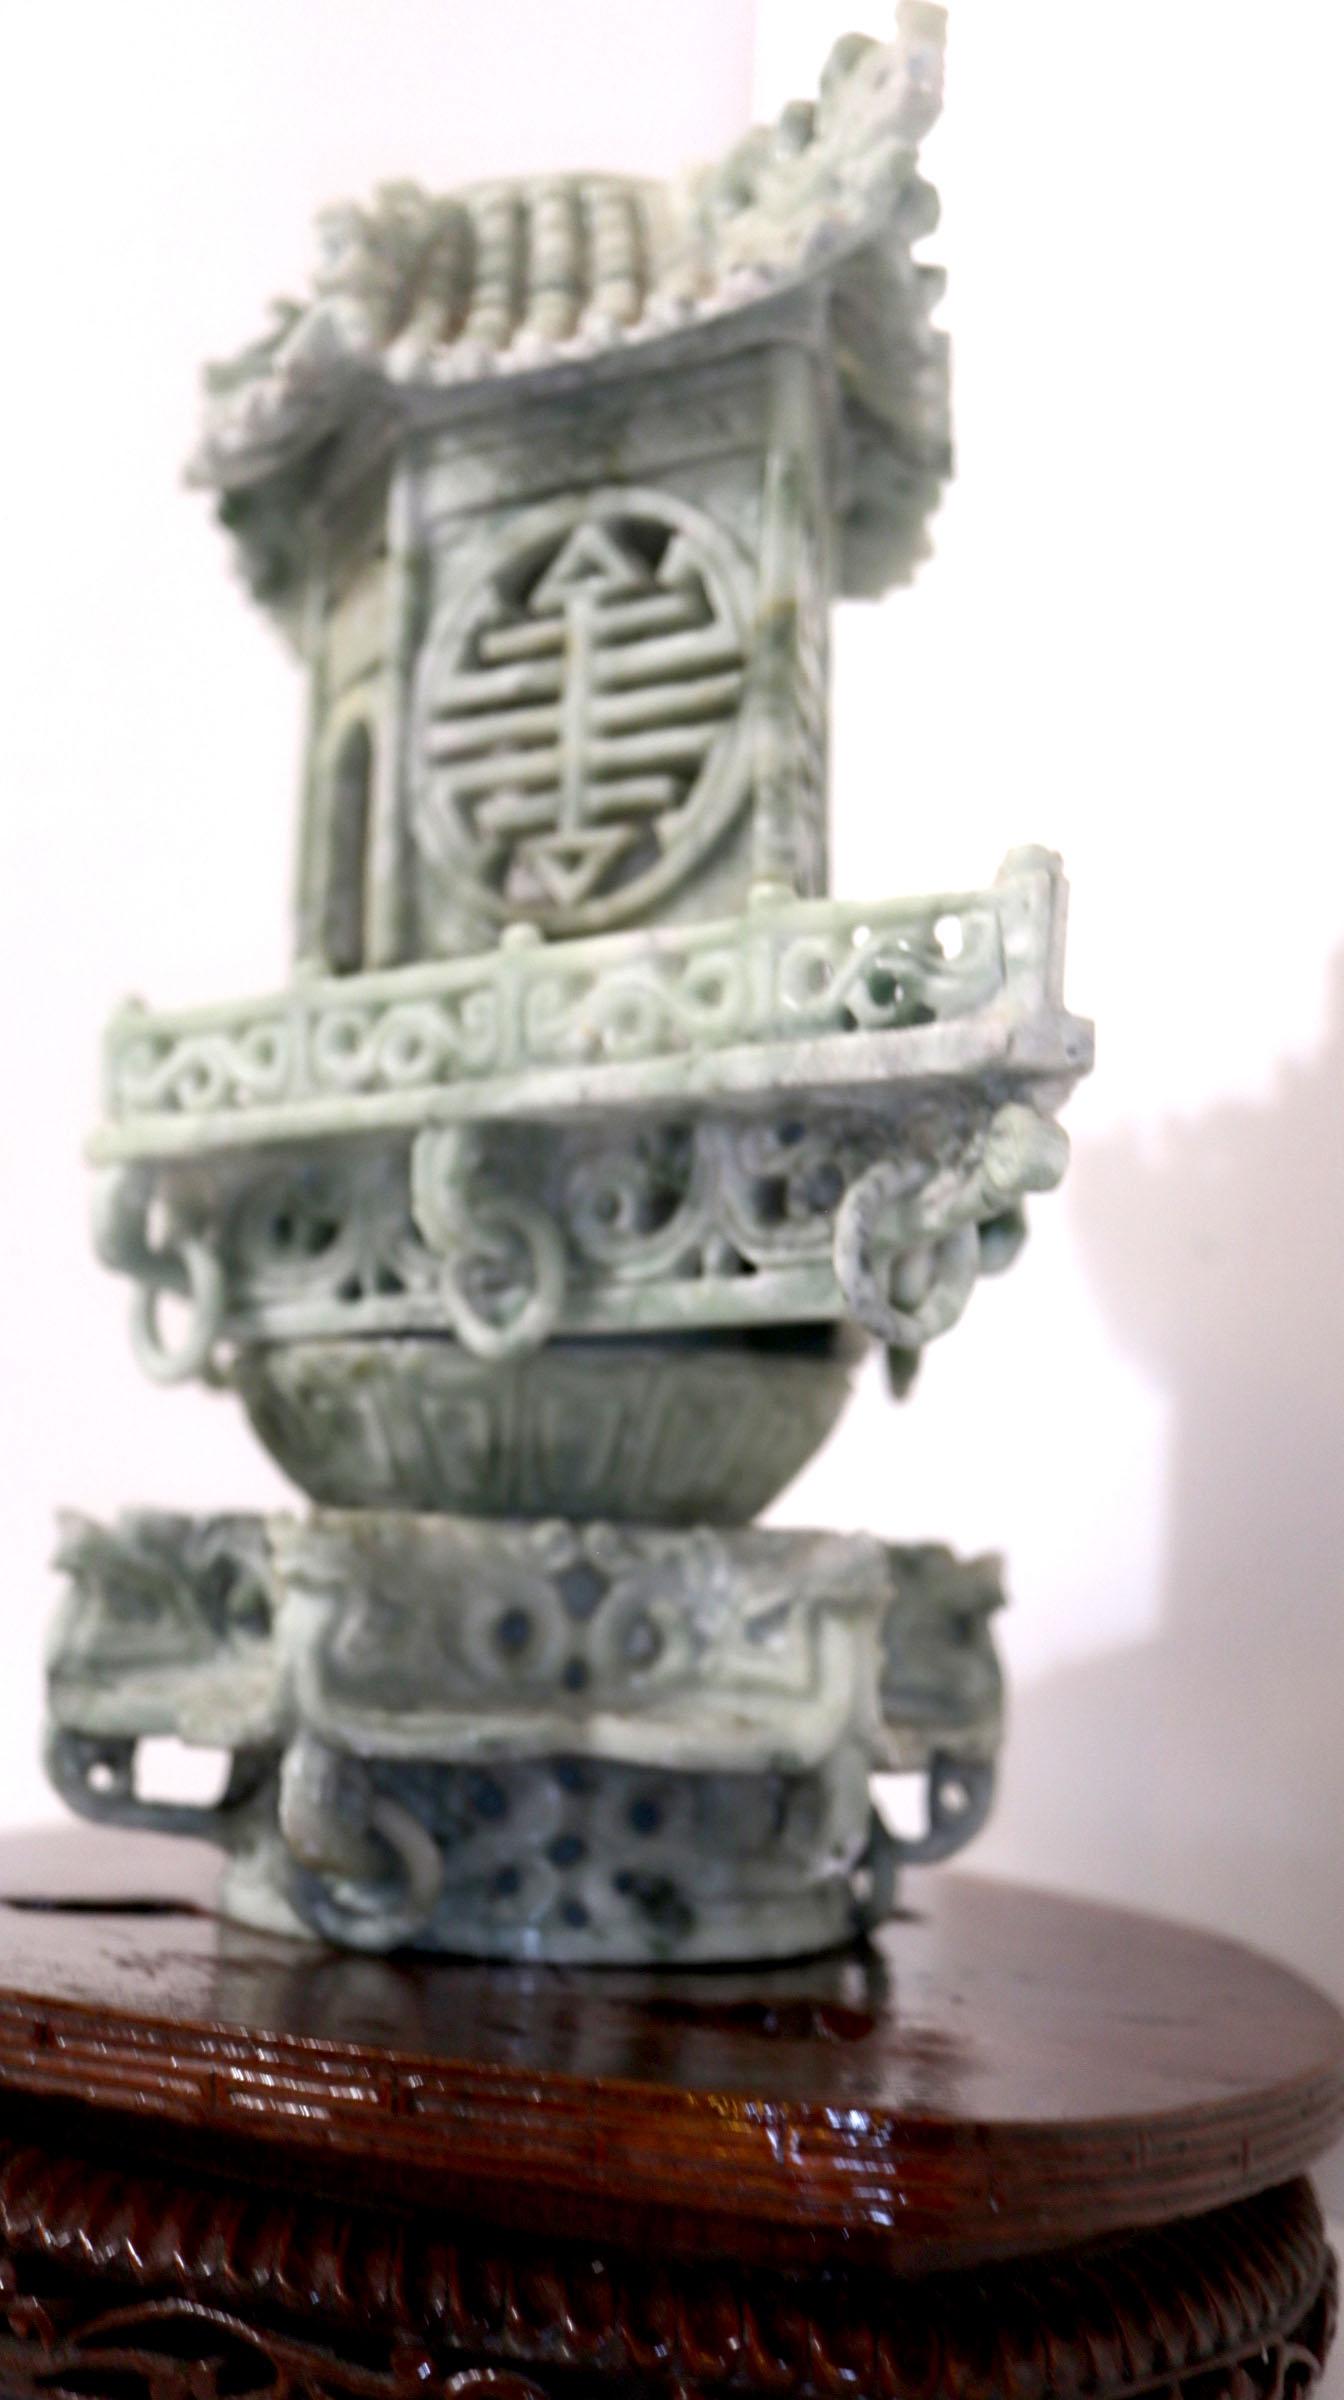 This is a special honan jade temple carving censer with a small Buddha figure visible from inside the carving in white. The color is cool with hints of white. It rests on an oval rosewood-colored base that is also carved around the edges.
In